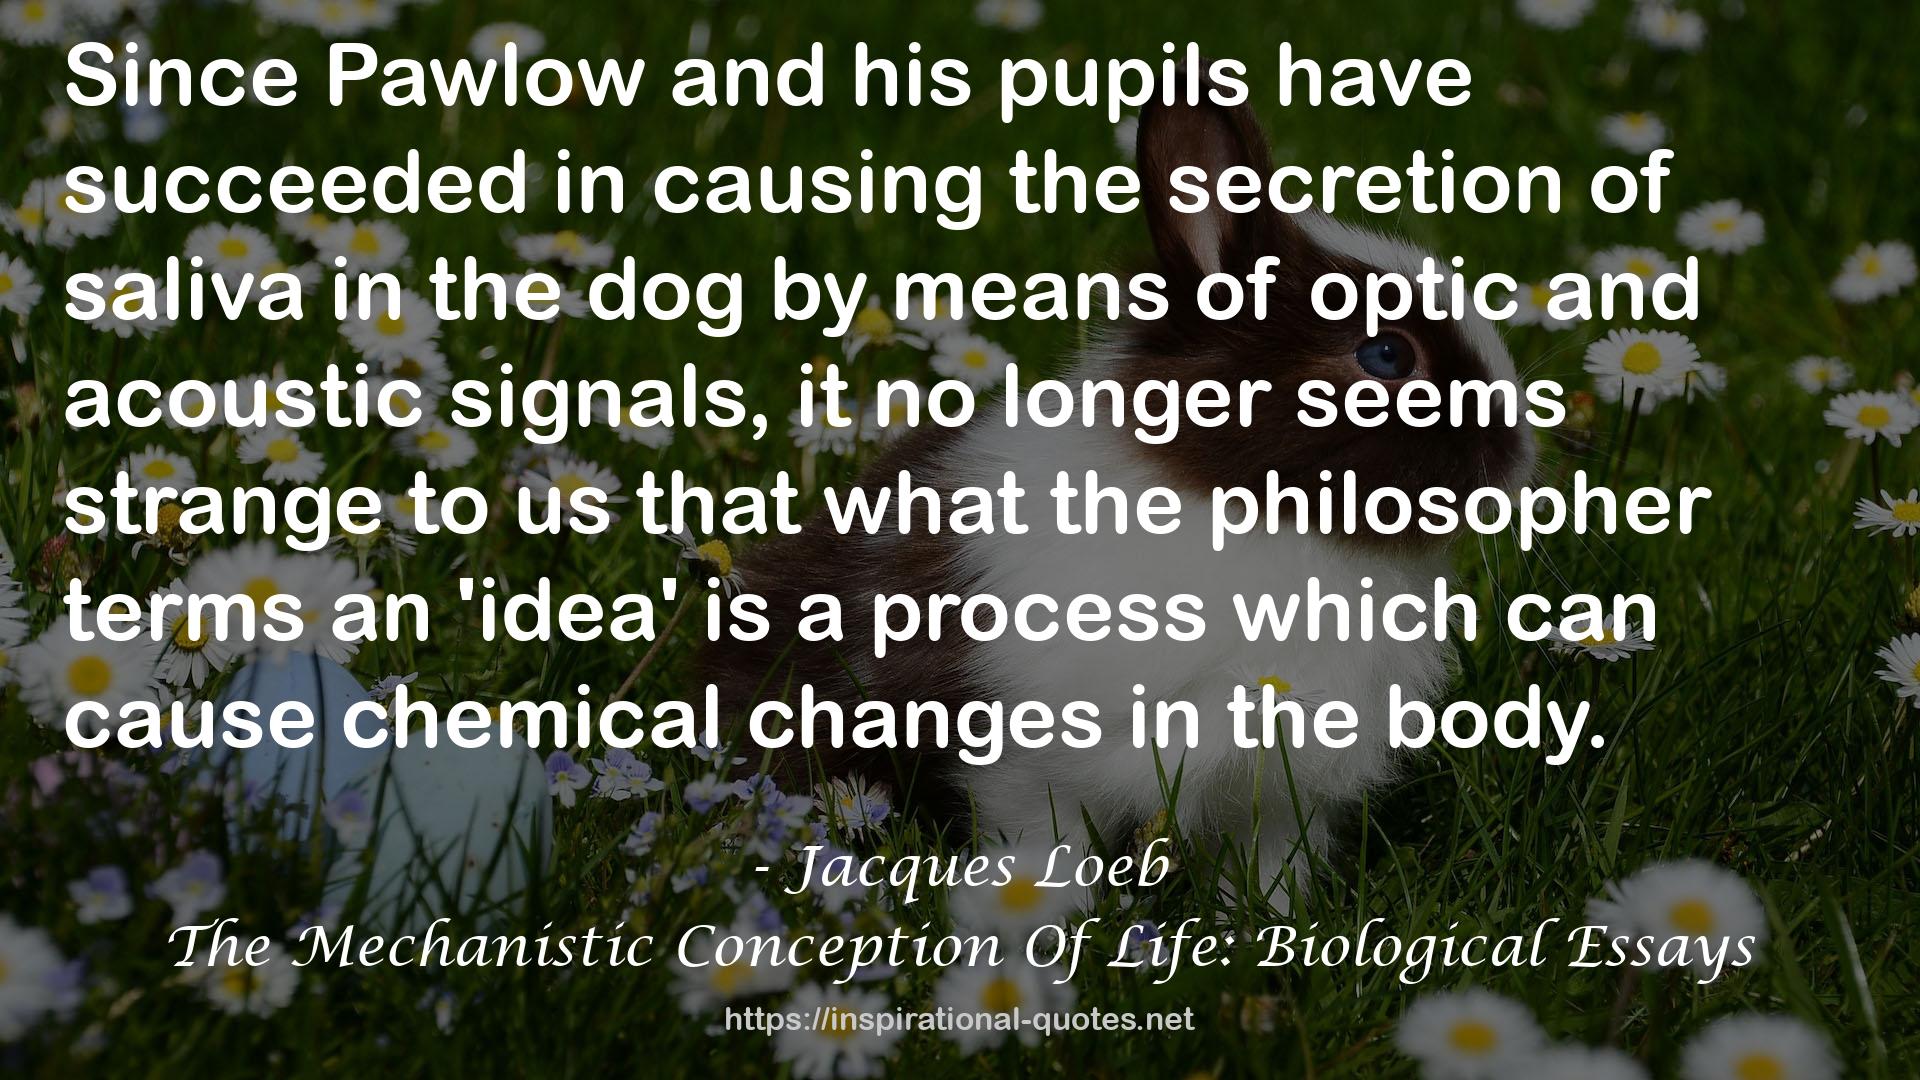 The Mechanistic Conception Of Life: Biological Essays QUOTES